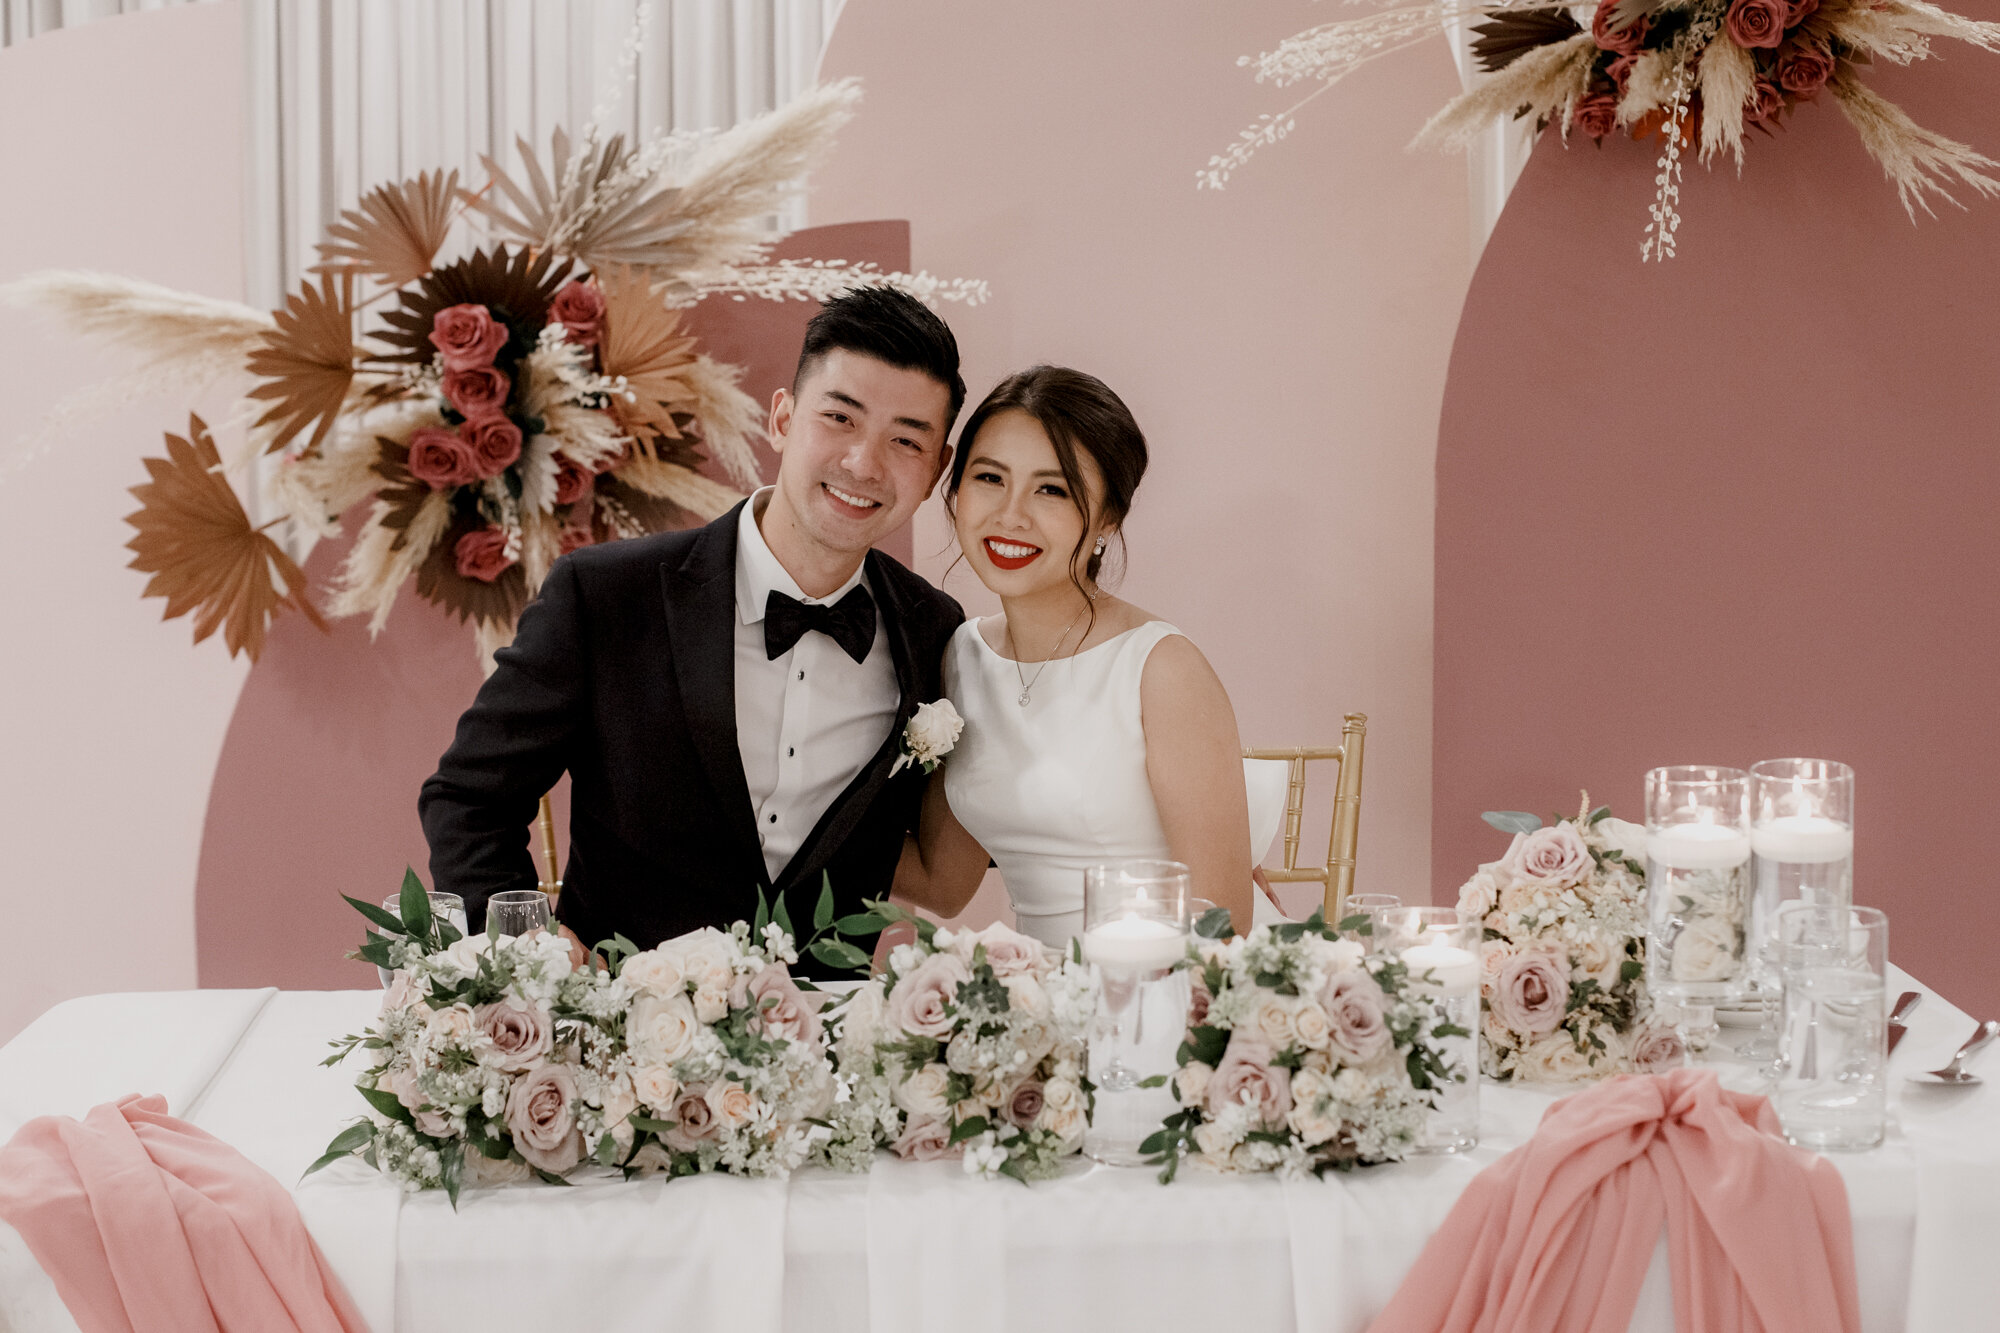 Bride and groom at the sweetheart table Urban Elegant East Asian Wedding at Chateau De L’Amour